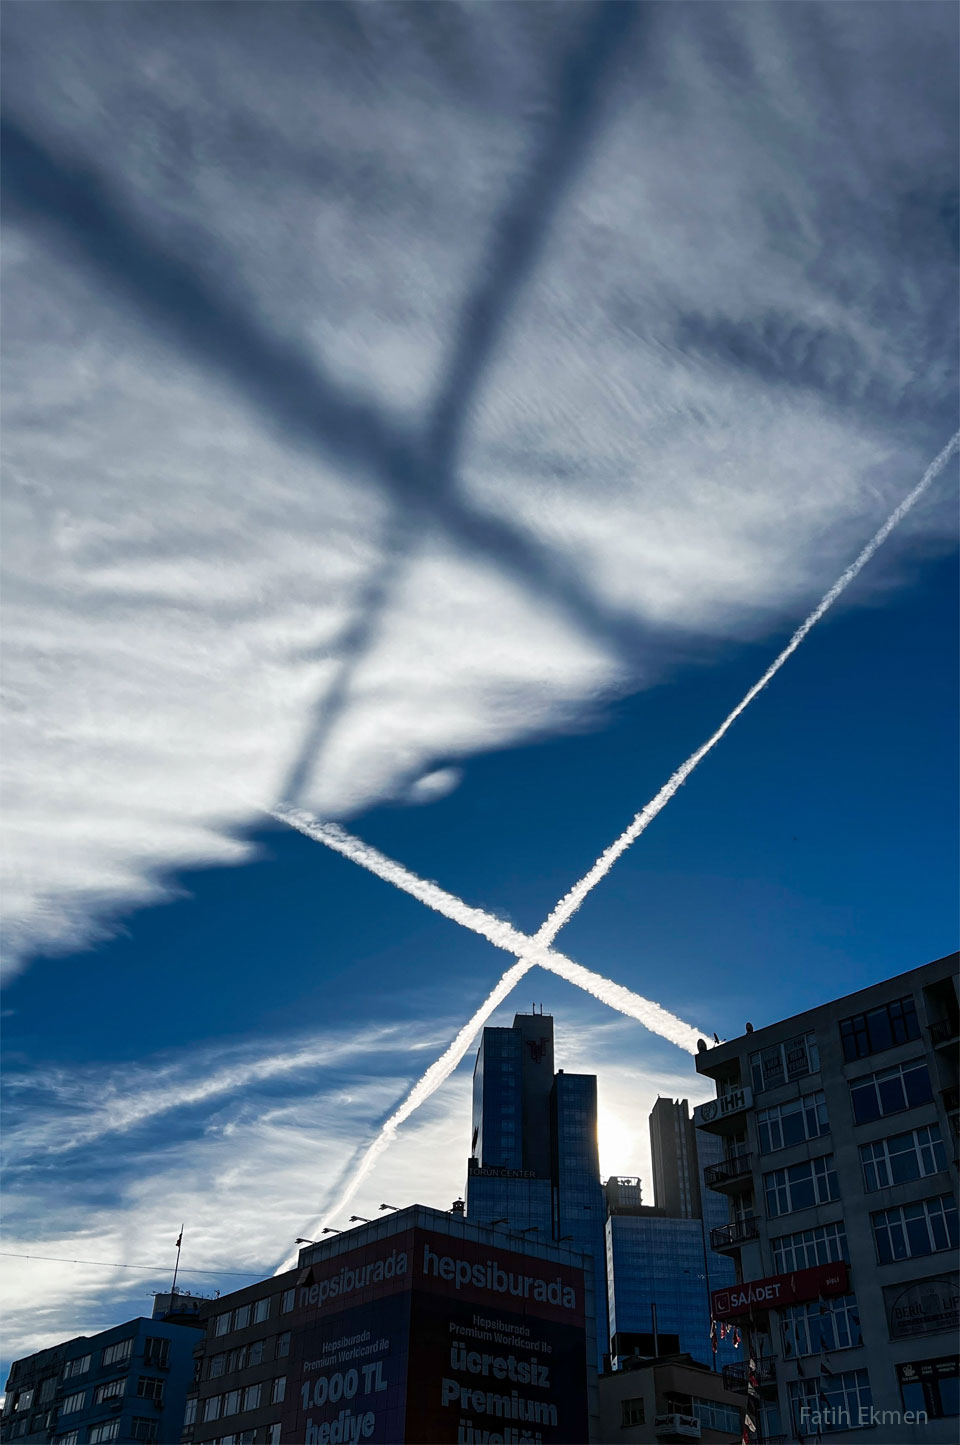 Two airplane contrails, crossing in an X, are shown across
the middle of the image. They are bright white against a dark
blue background. A high cloud deck is seen above the crossing,
sunlit, contrails. A low Sun creates a dark shadow X on the high
while clouds. A row of buildings runs across the lower
part of the image. 
Please see the explanation for more detailed information.